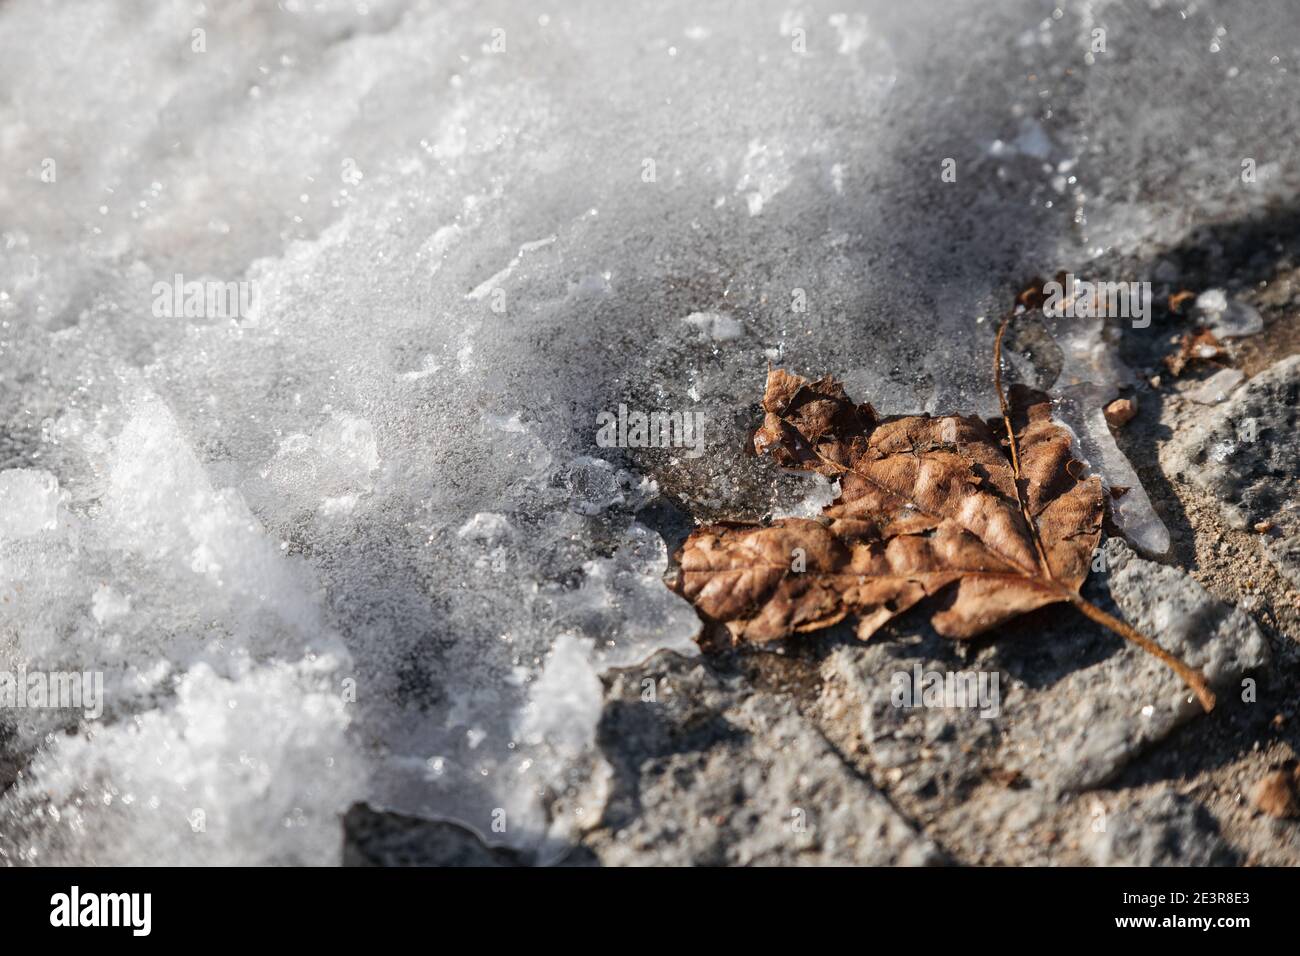 Brown dry autumn leaf fallen on snow and ice in Madrid Stock Photo